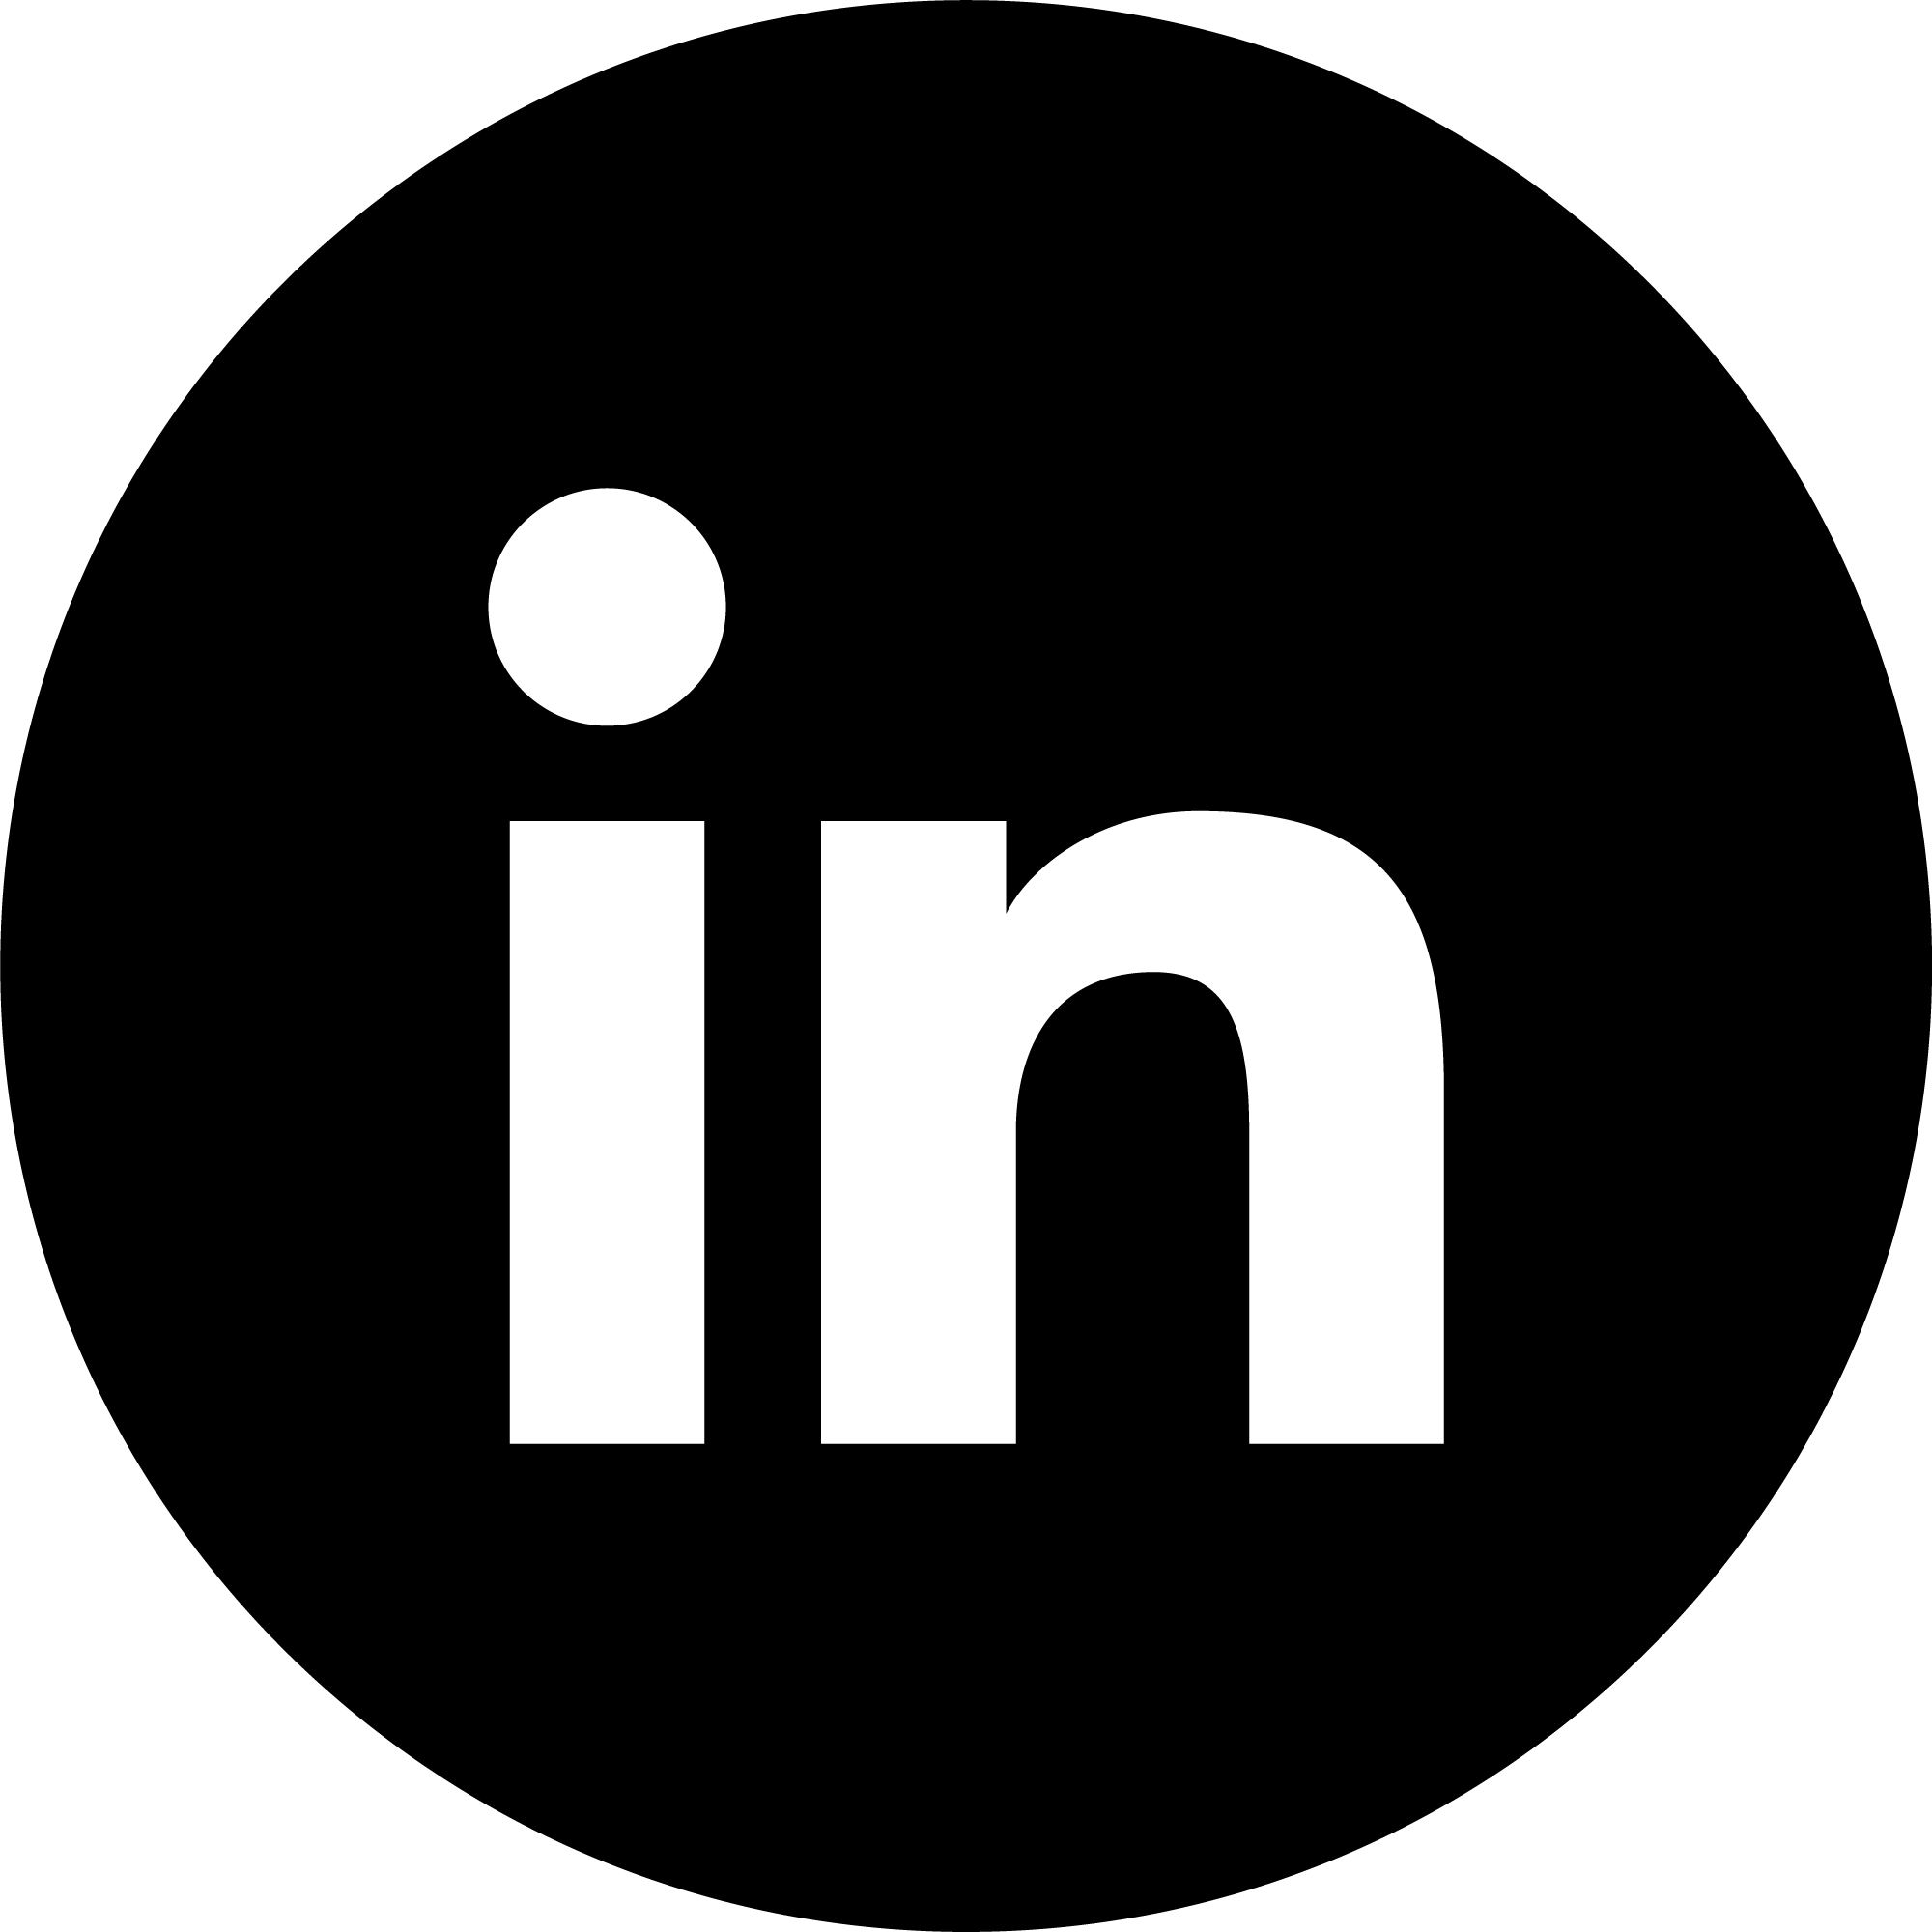 Linkedin Logo For Email Signature title=